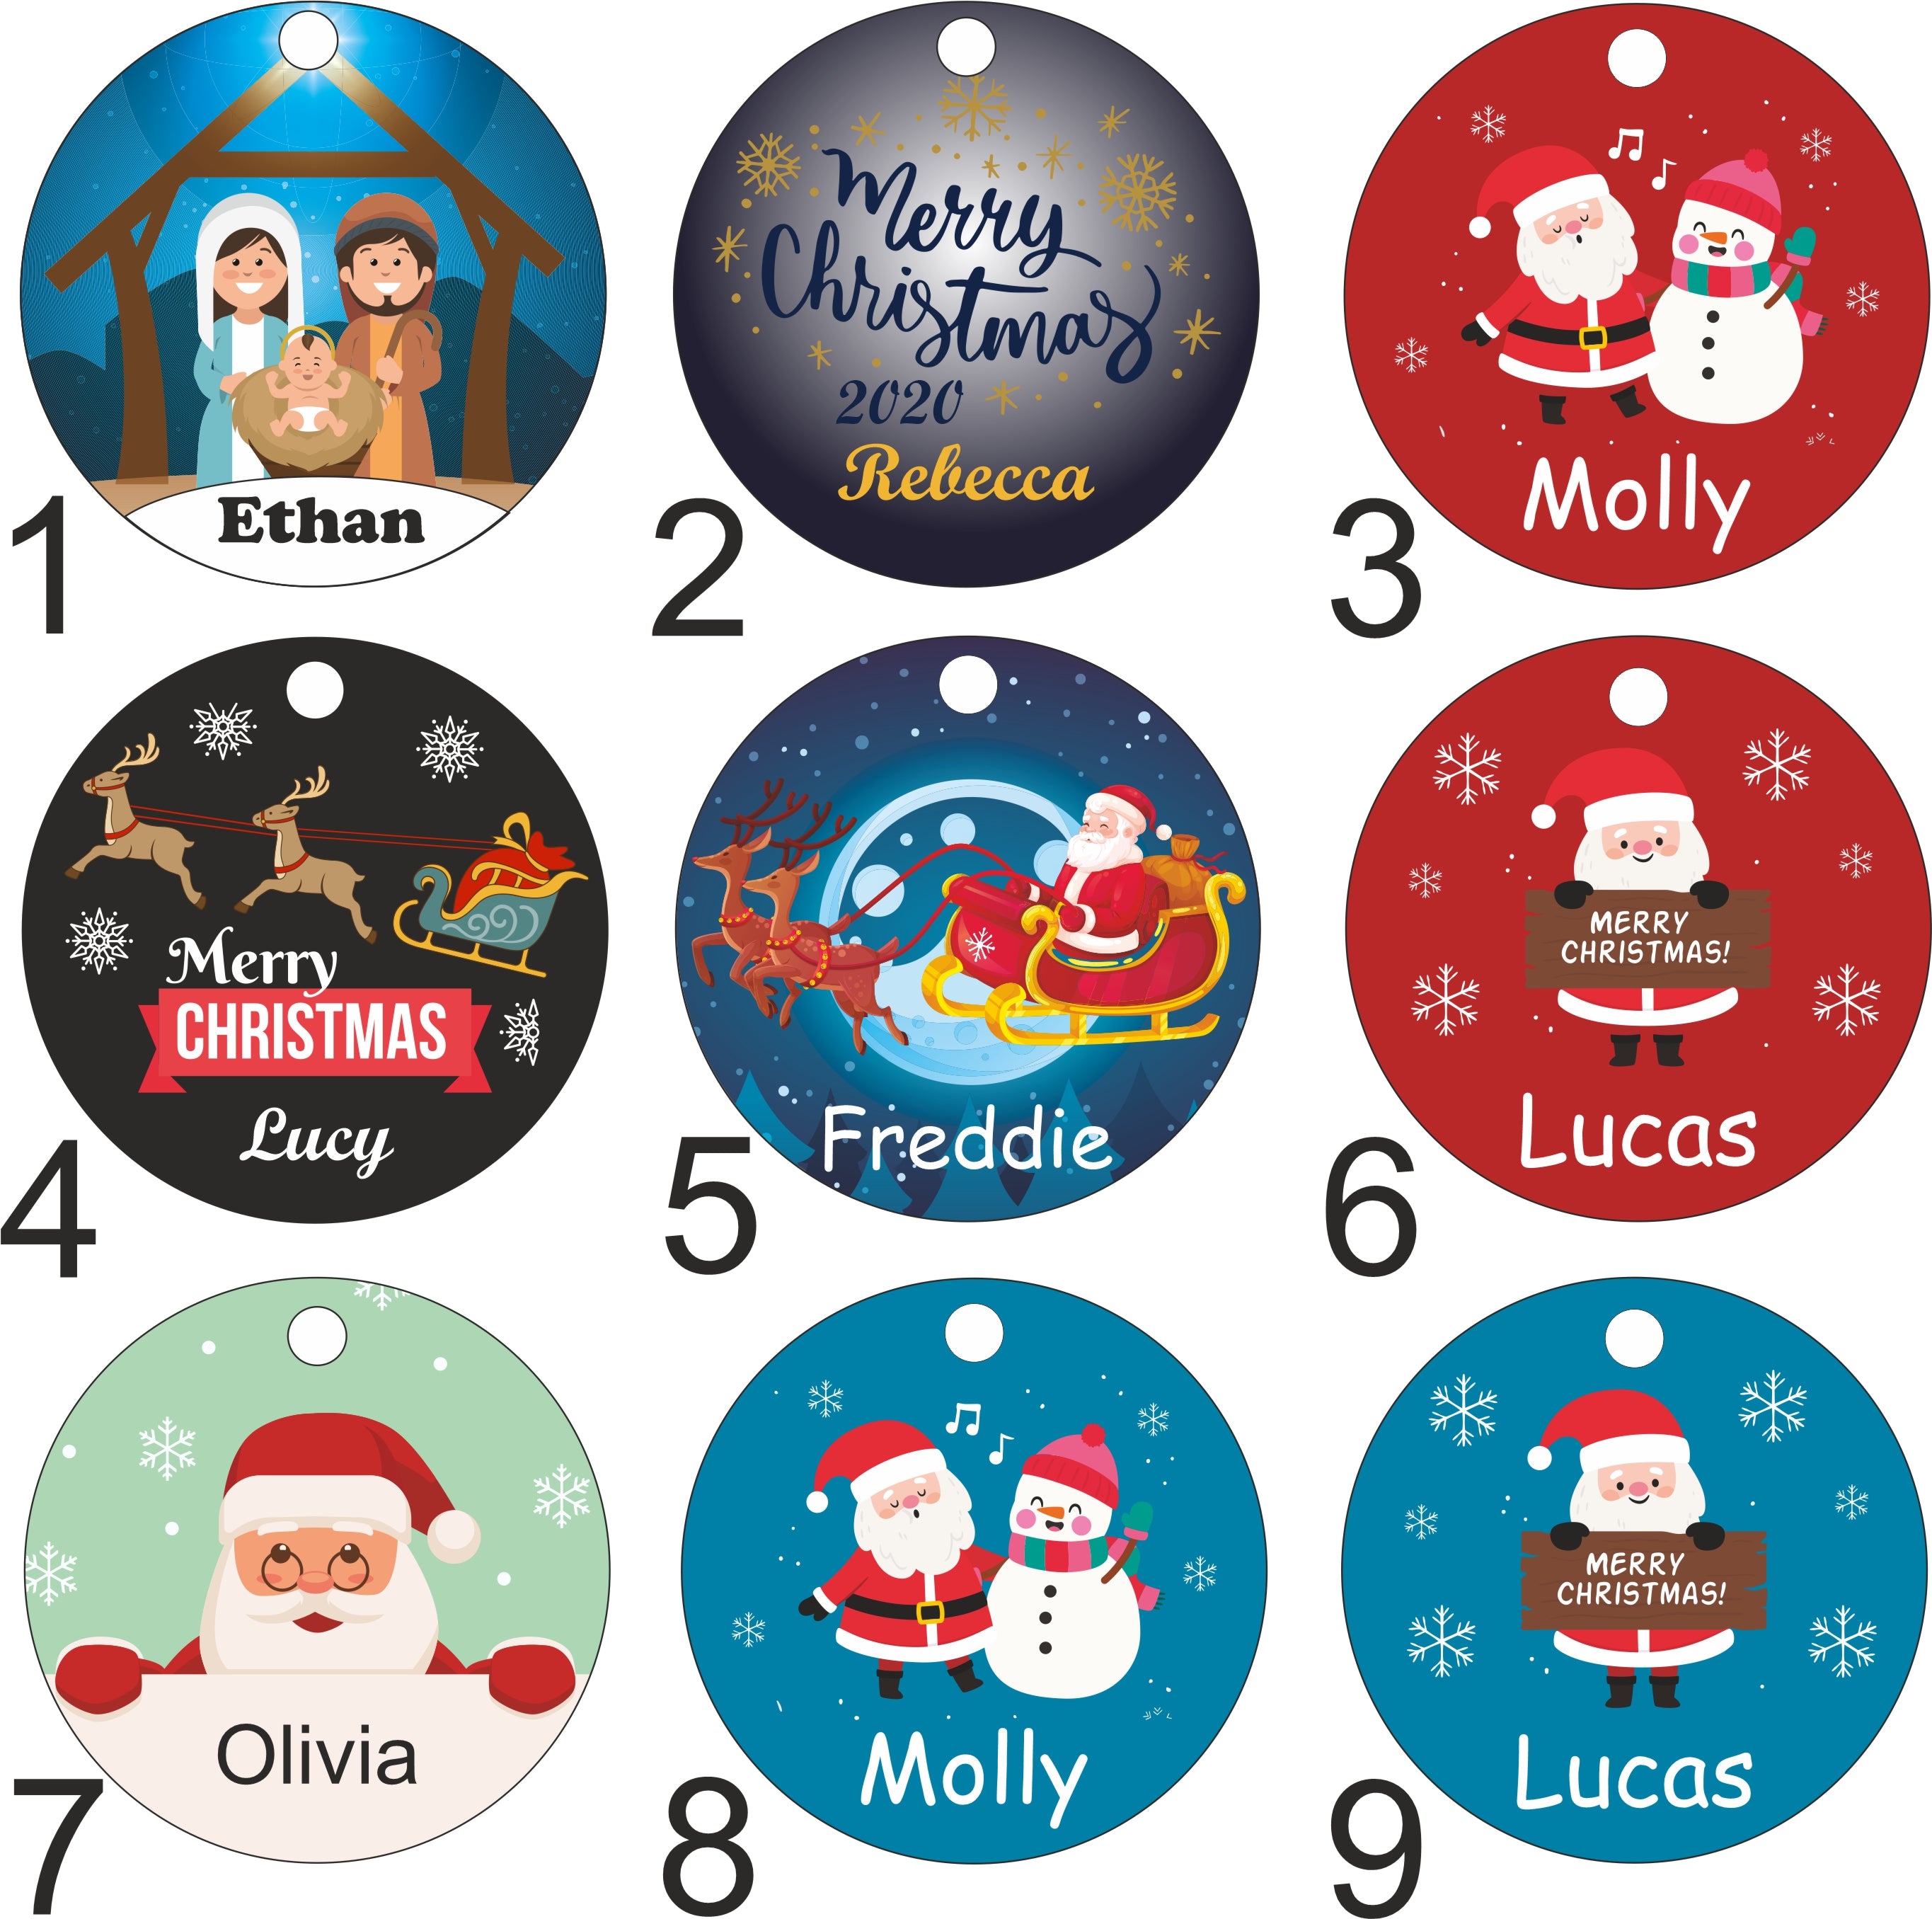 Personalised Christmas Bauble - Custom Designed Baubles Printed with Any Name - Ideal as a Gift Tag